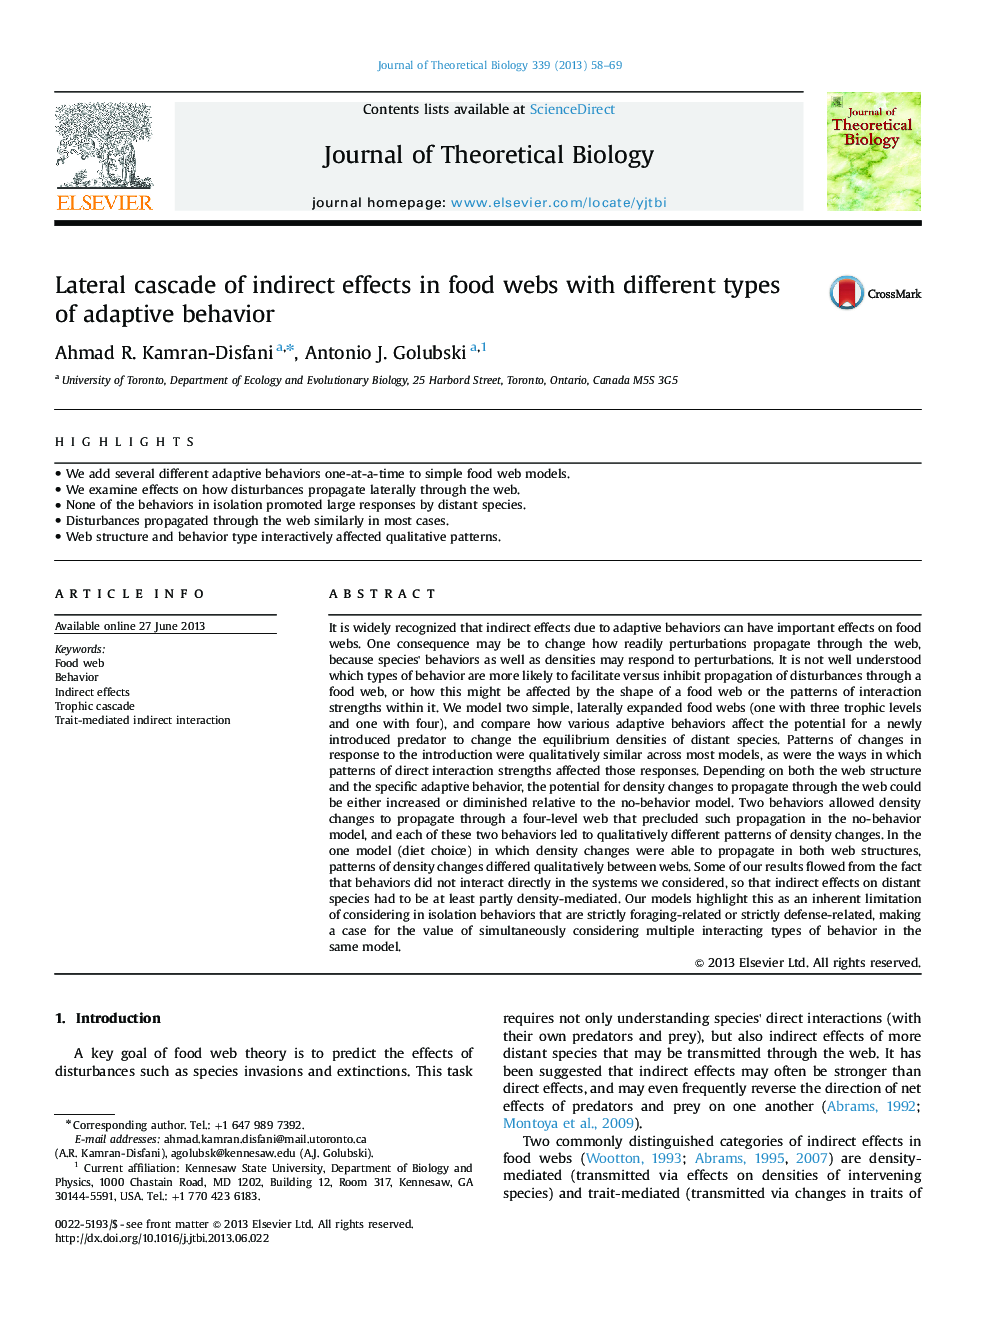 Lateral cascade of indirect effects in food webs with different types of adaptive behavior